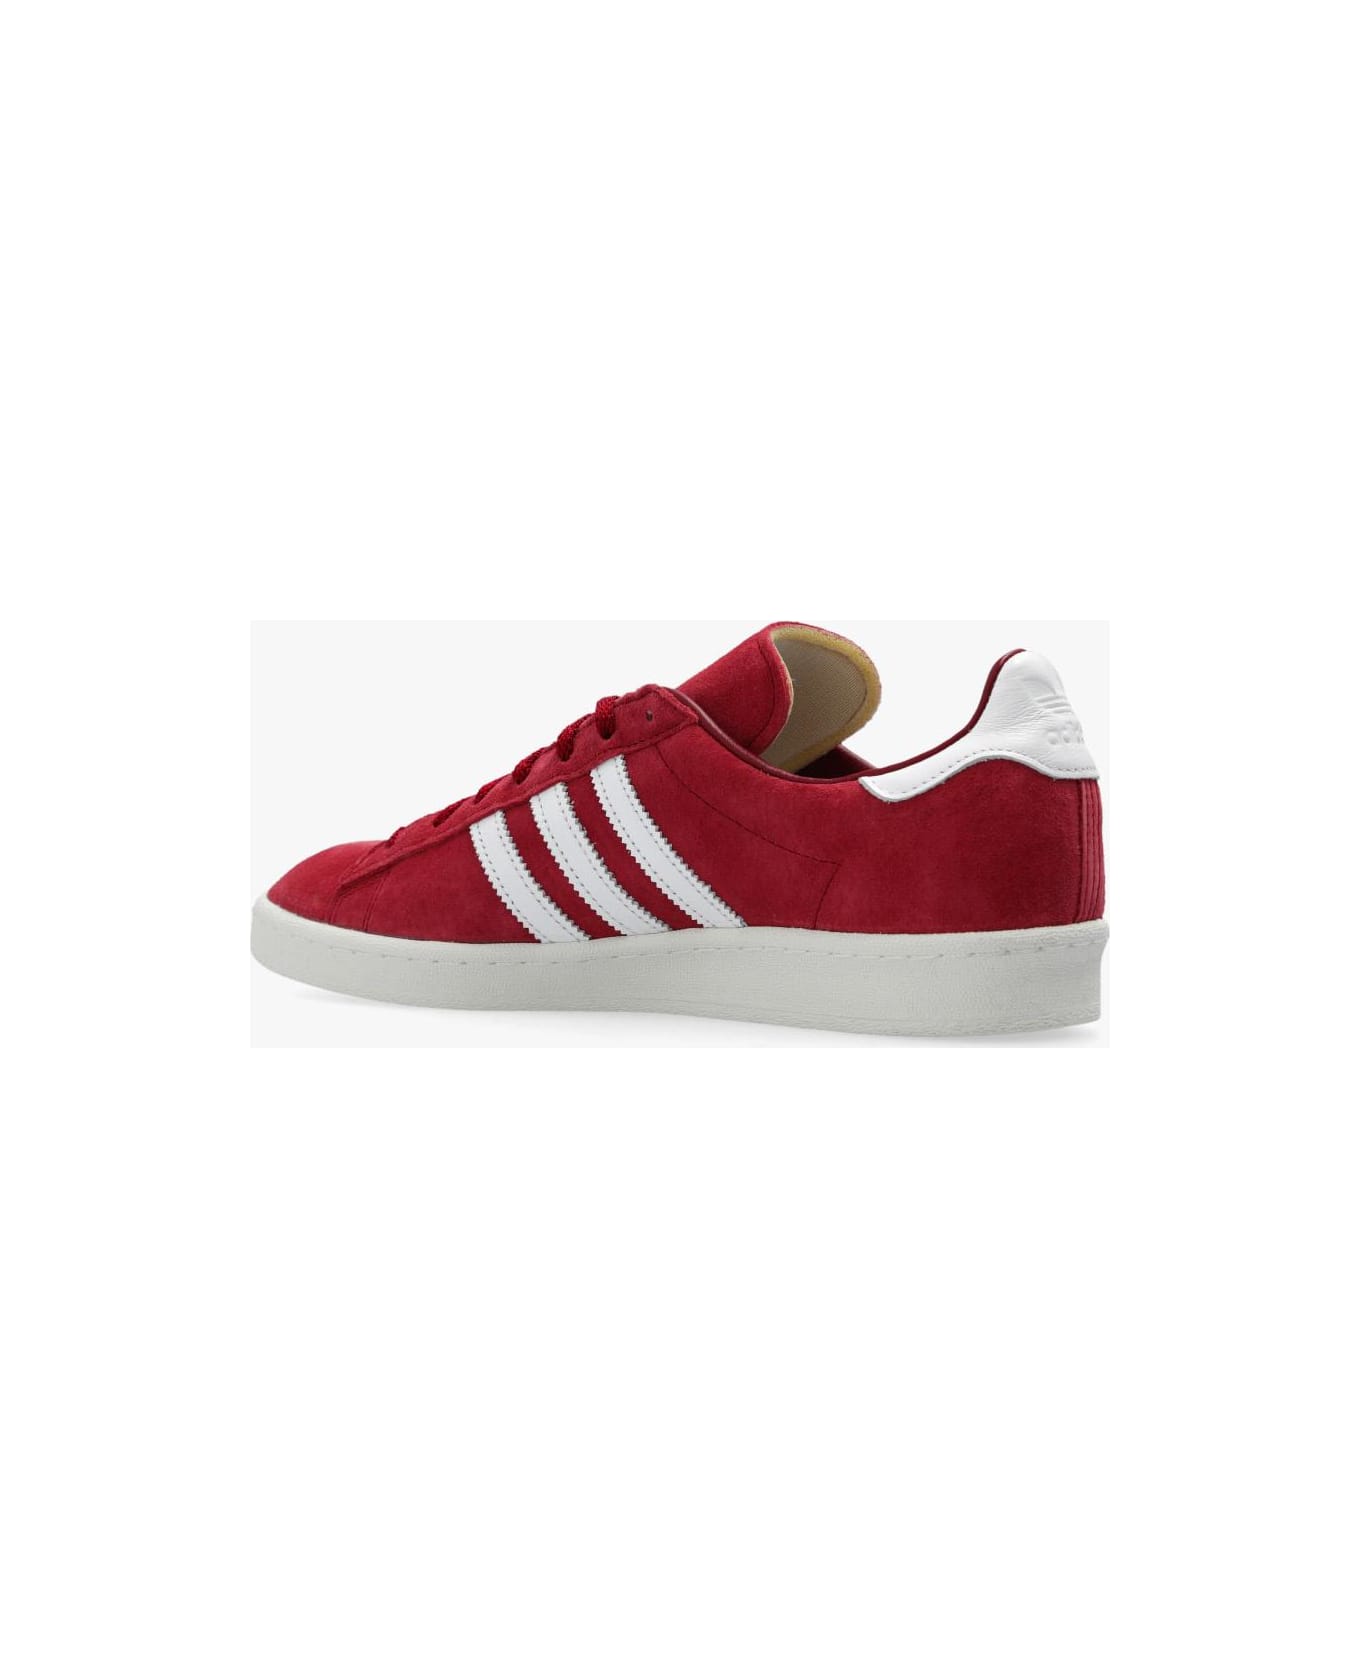 Adidas 'campus 80s' Sneakers - RED スニーカー